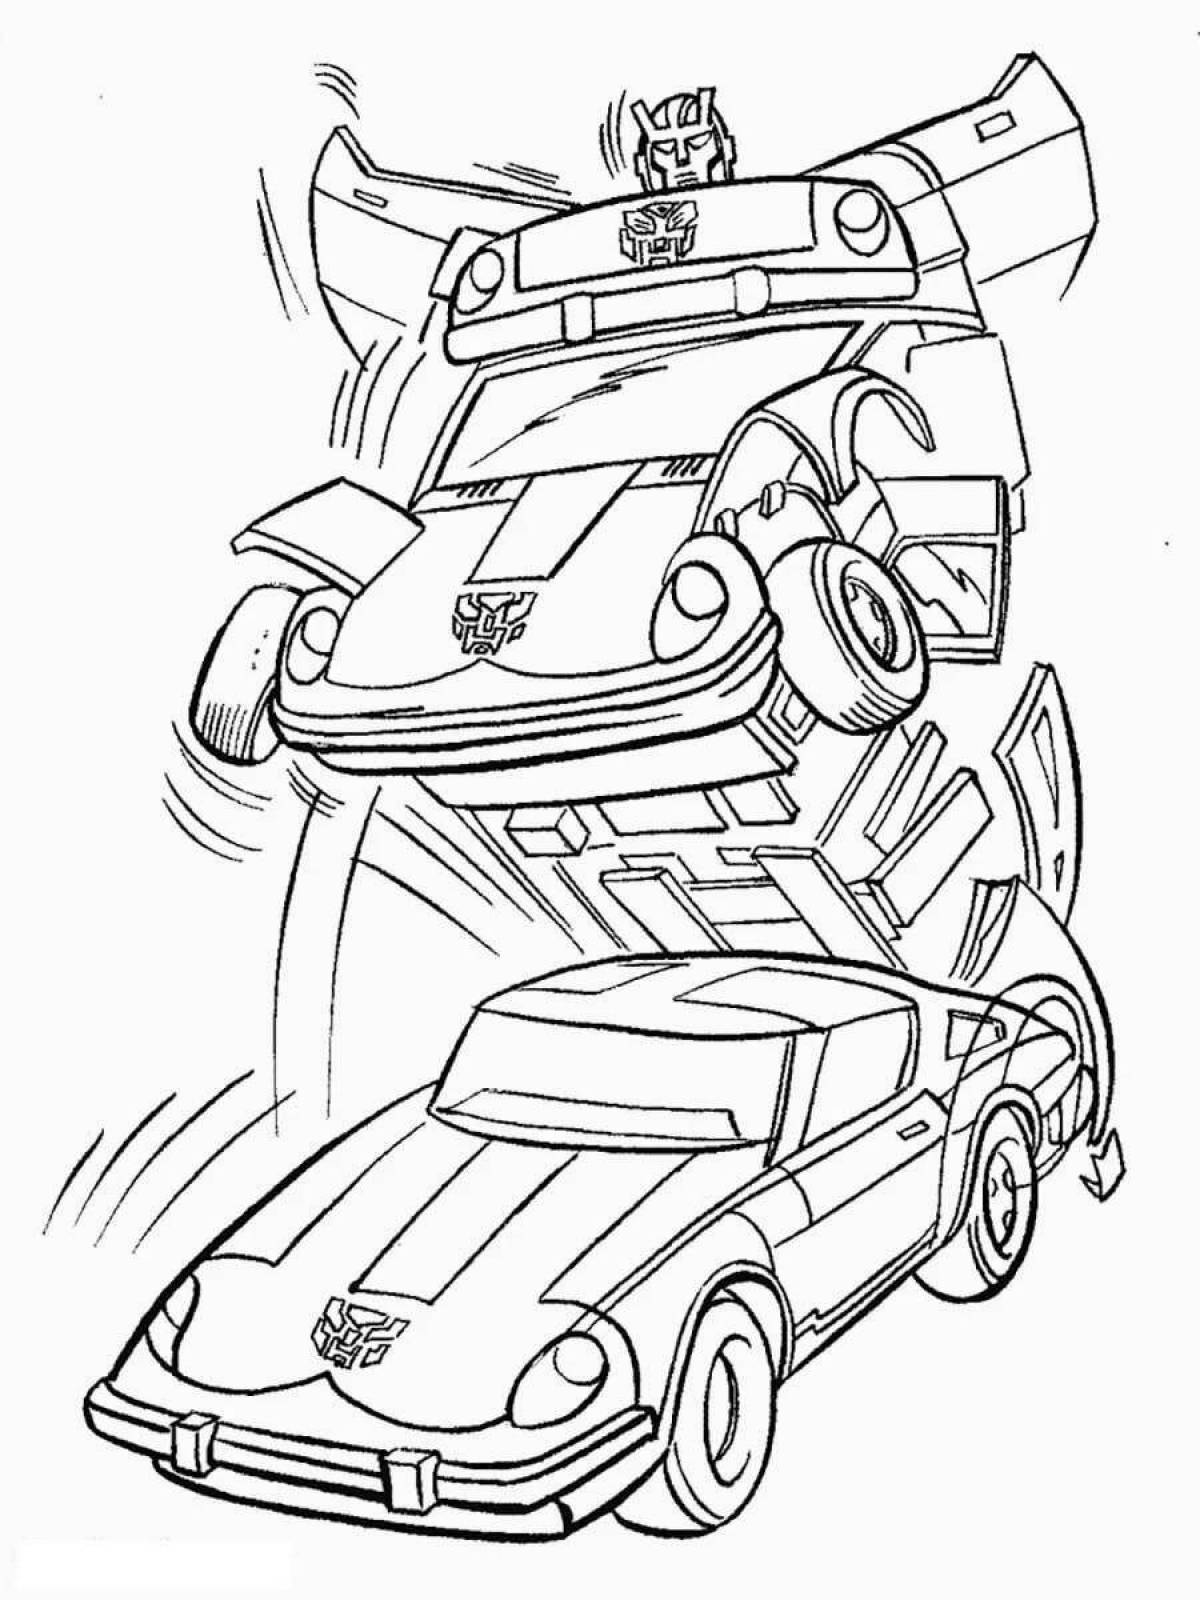 Coloring page stylish robot car